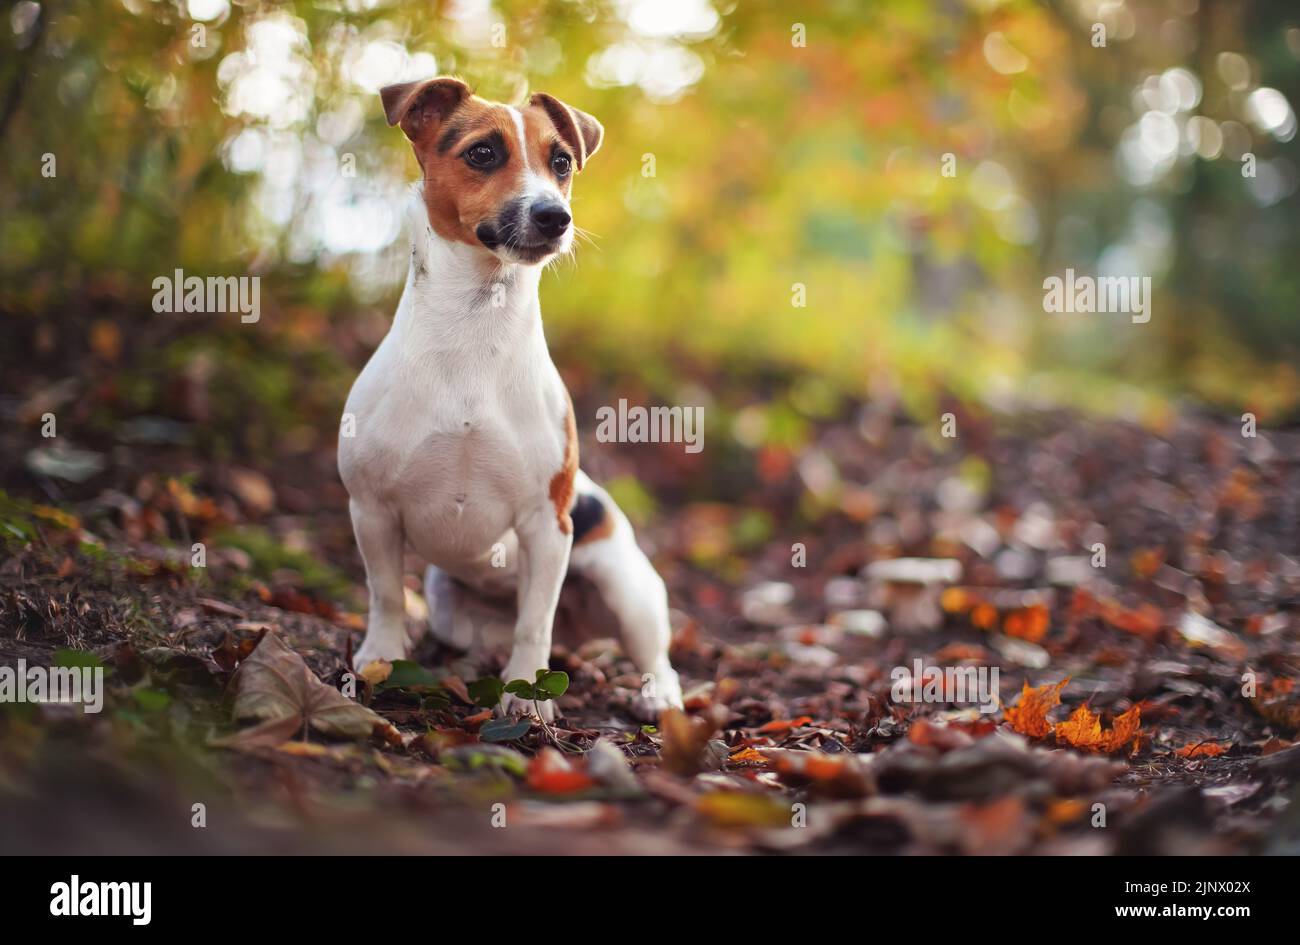 Small Jack Russell terrier sitting on forest path with yellow orange leaves in autumn, blurred trees background Stock Photo